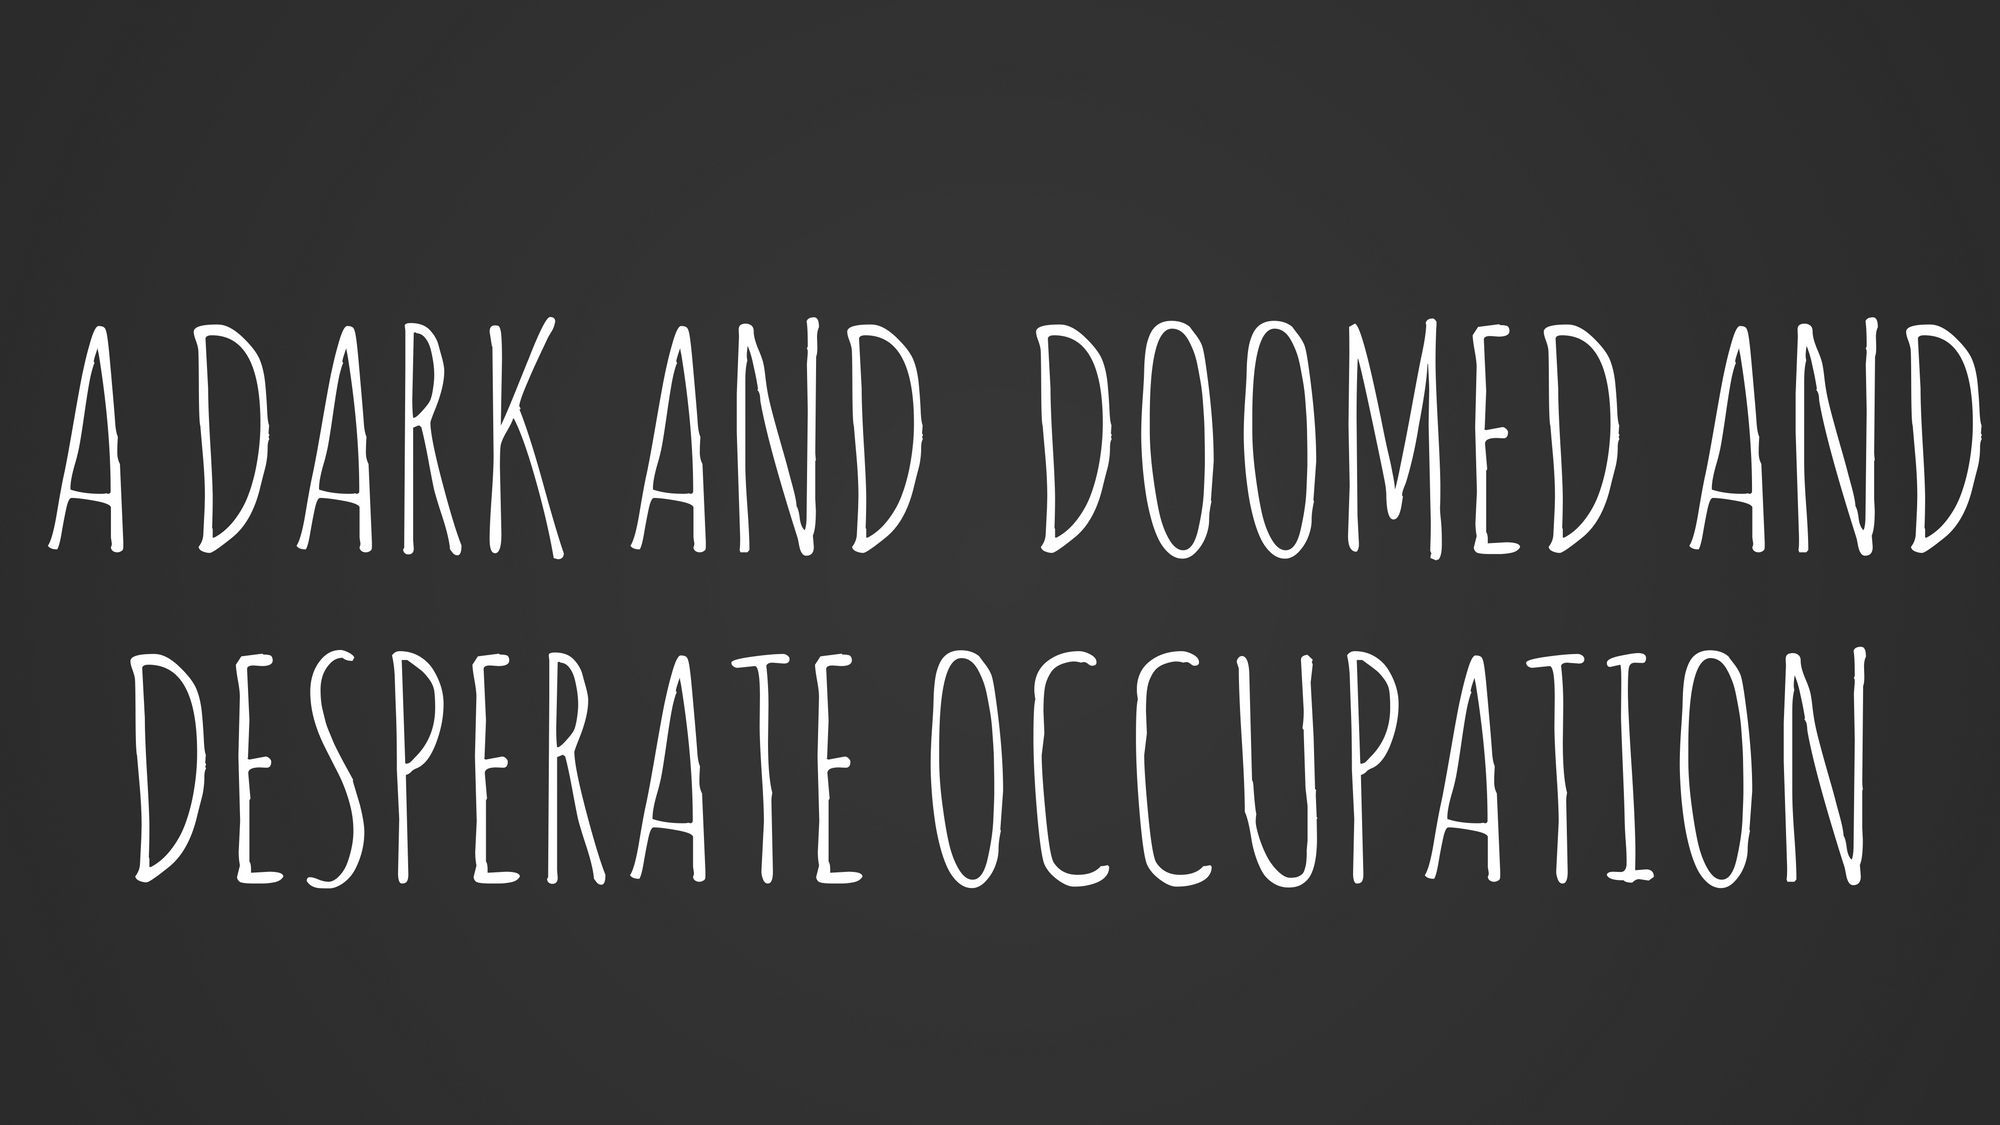 A dark and doomed and desperate occupation